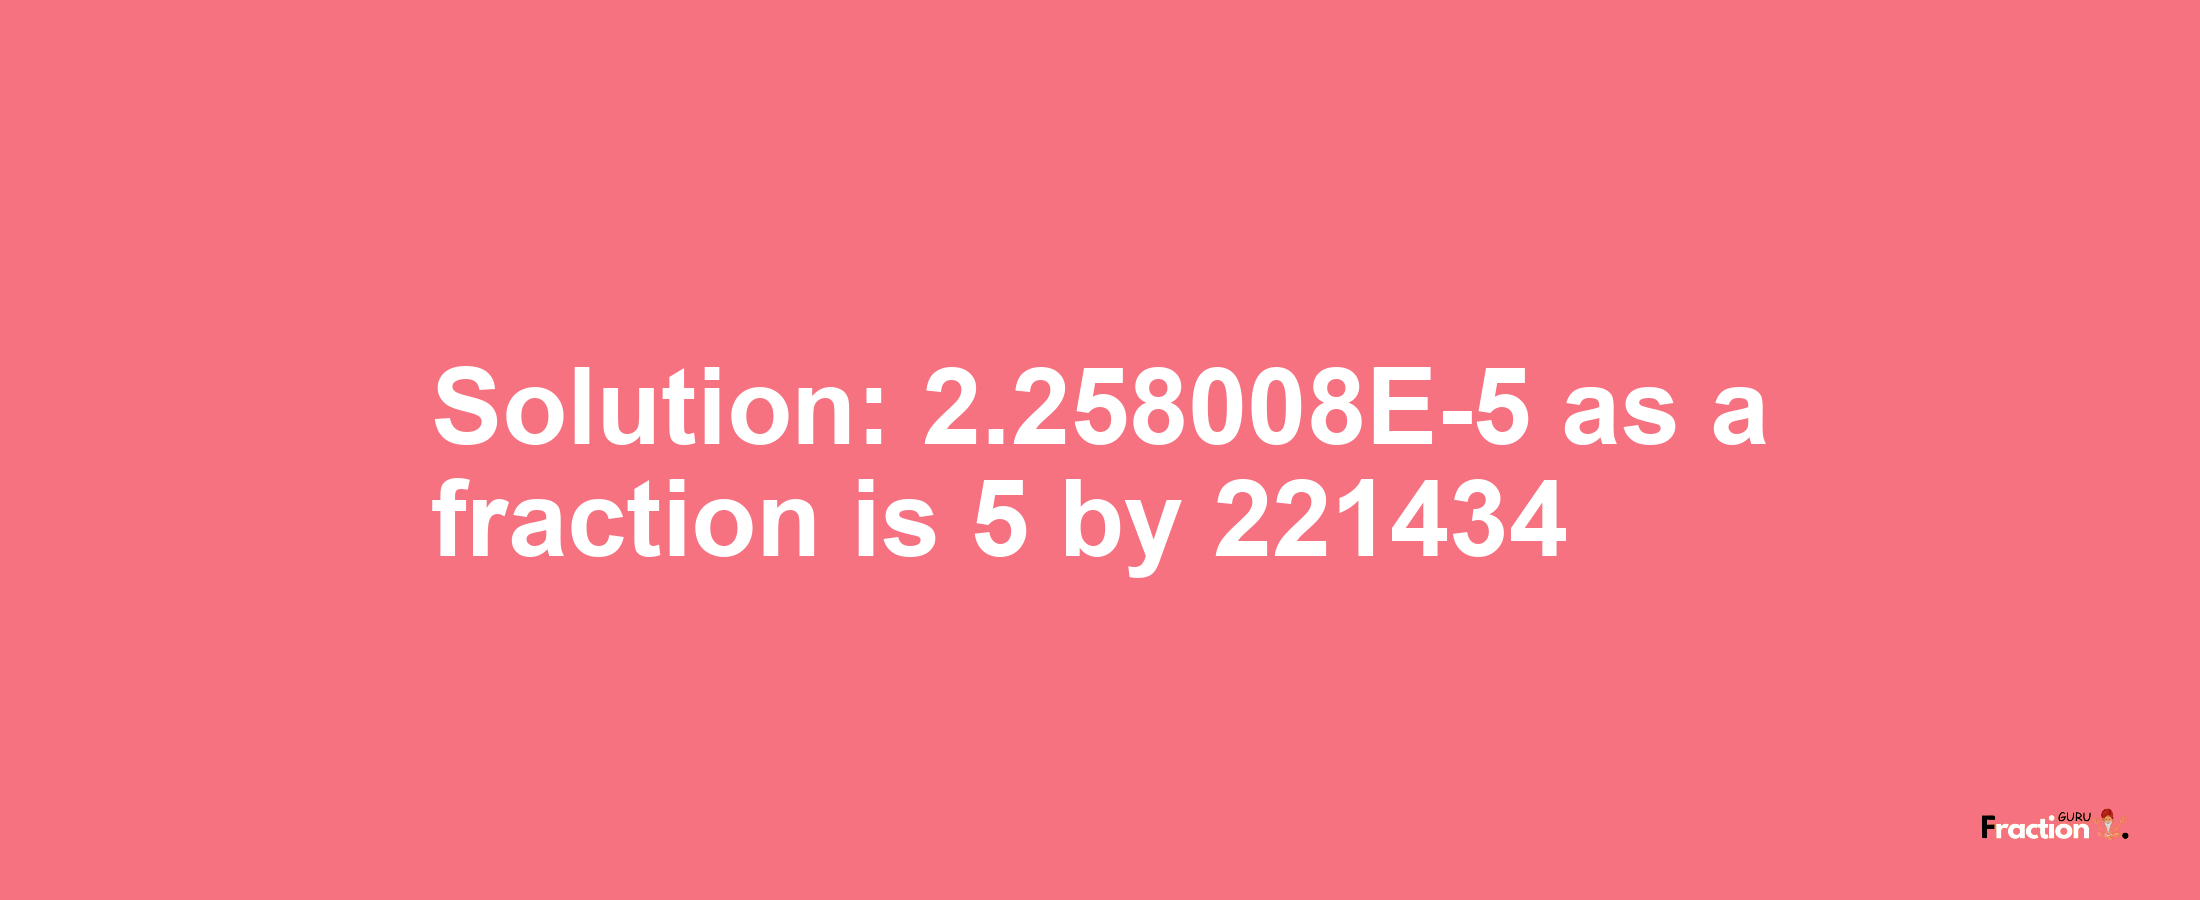 Solution:2.258008E-5 as a fraction is 5/221434